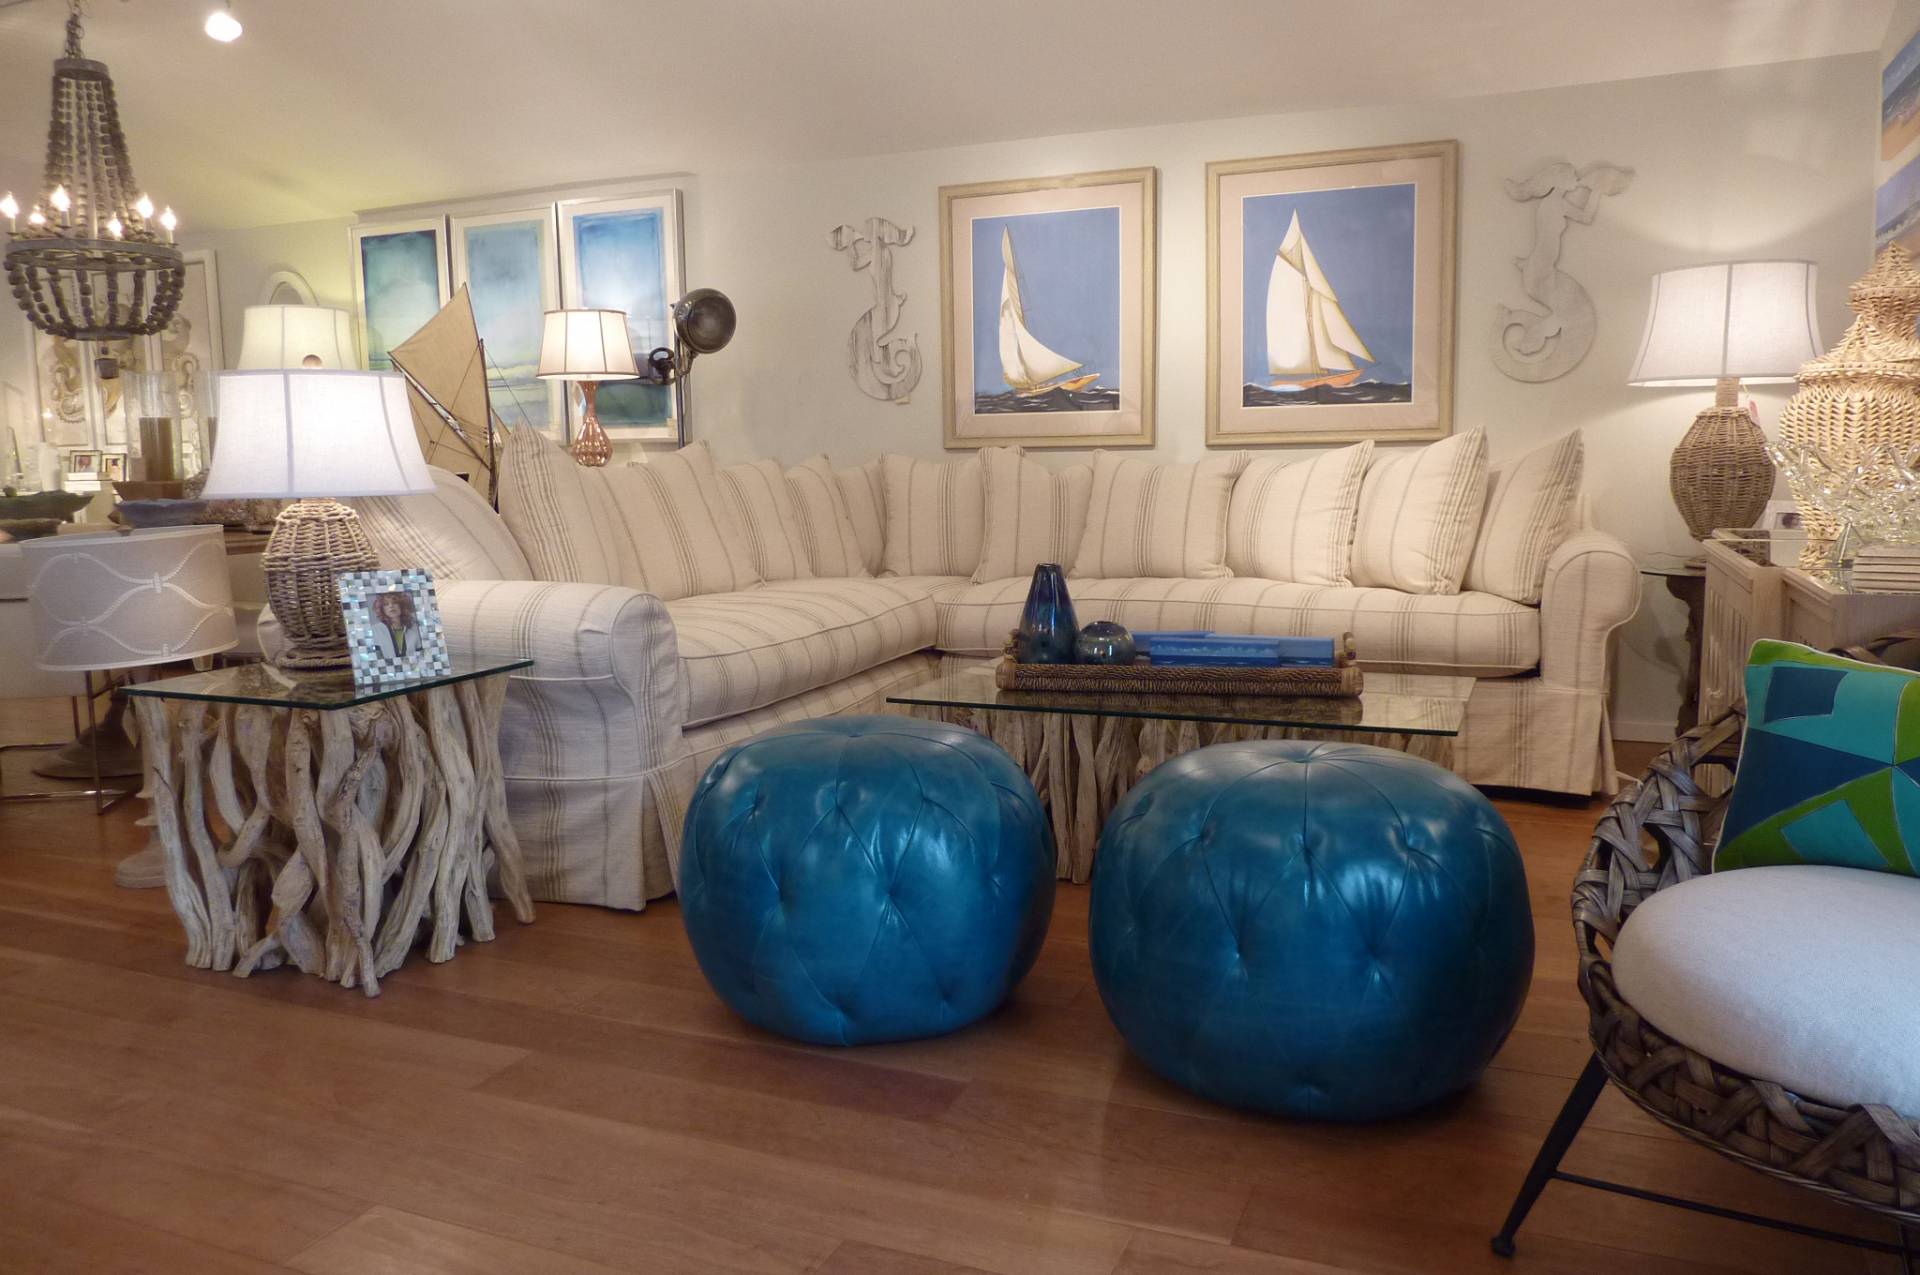 Sectional with Sailboats